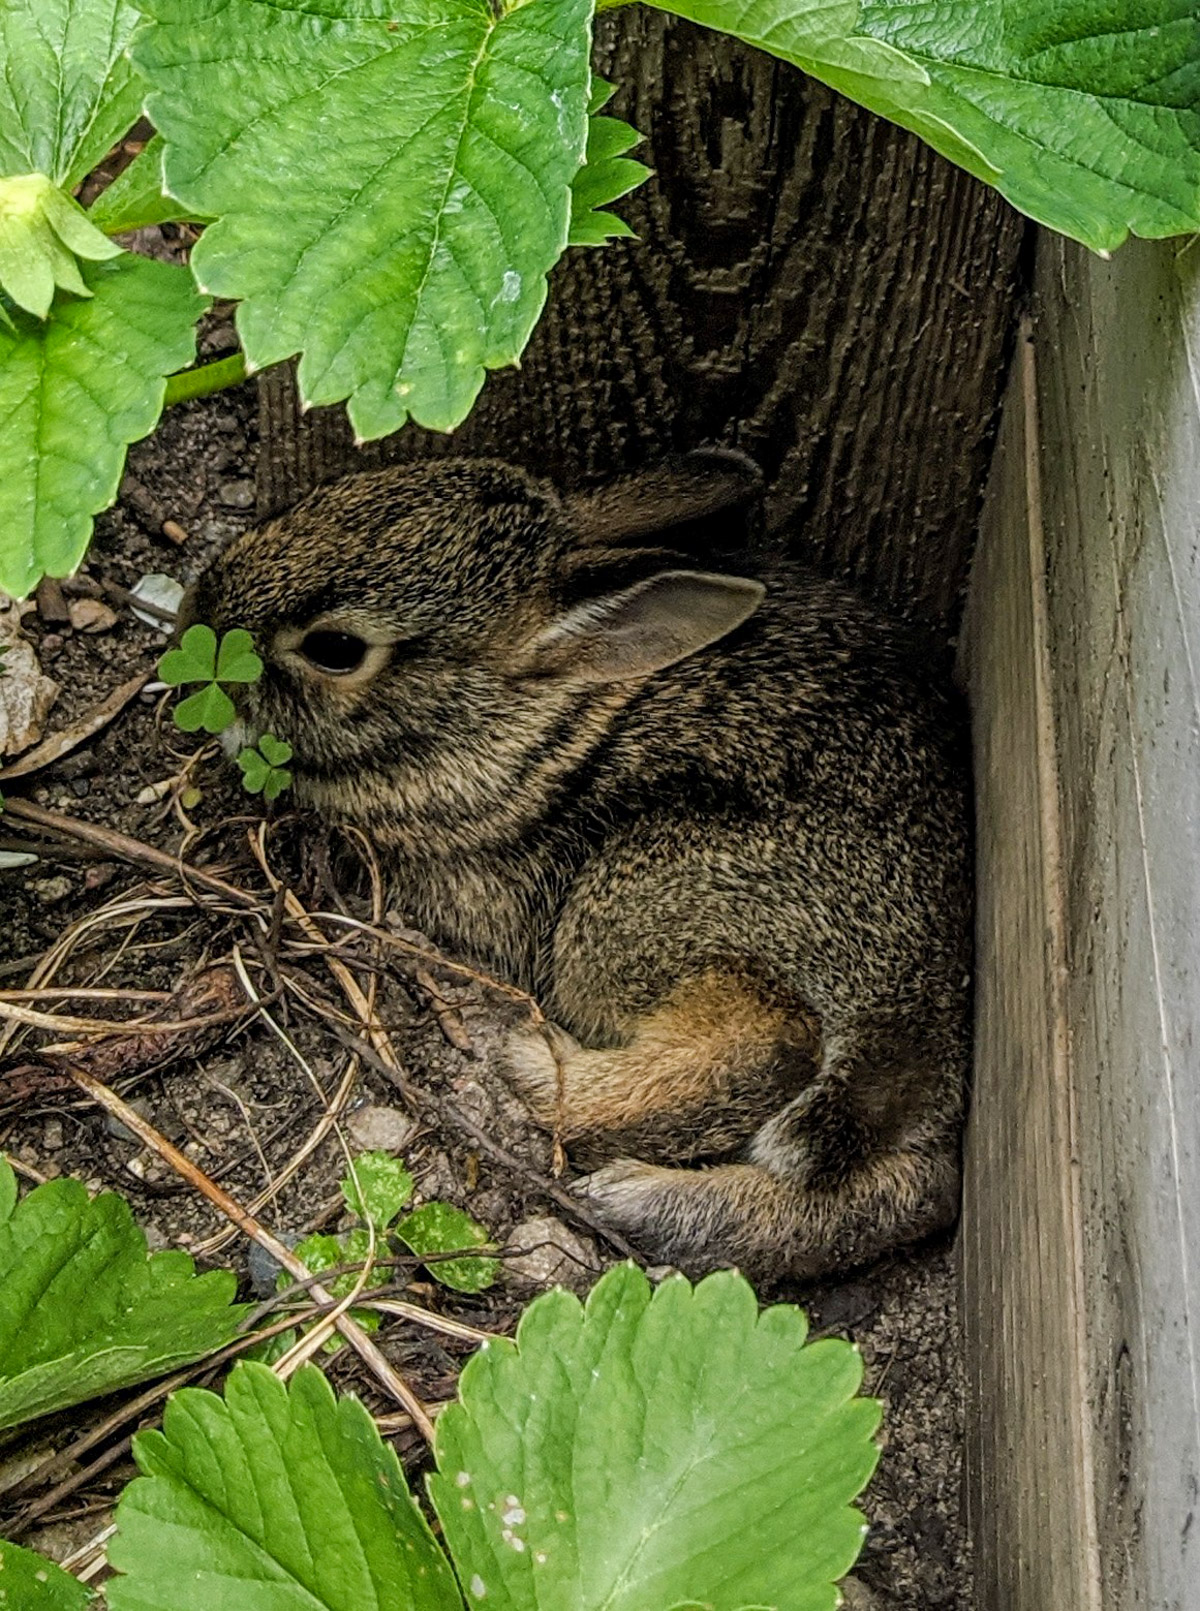 A baby bunny hiding under leaves in the raised bed garden.